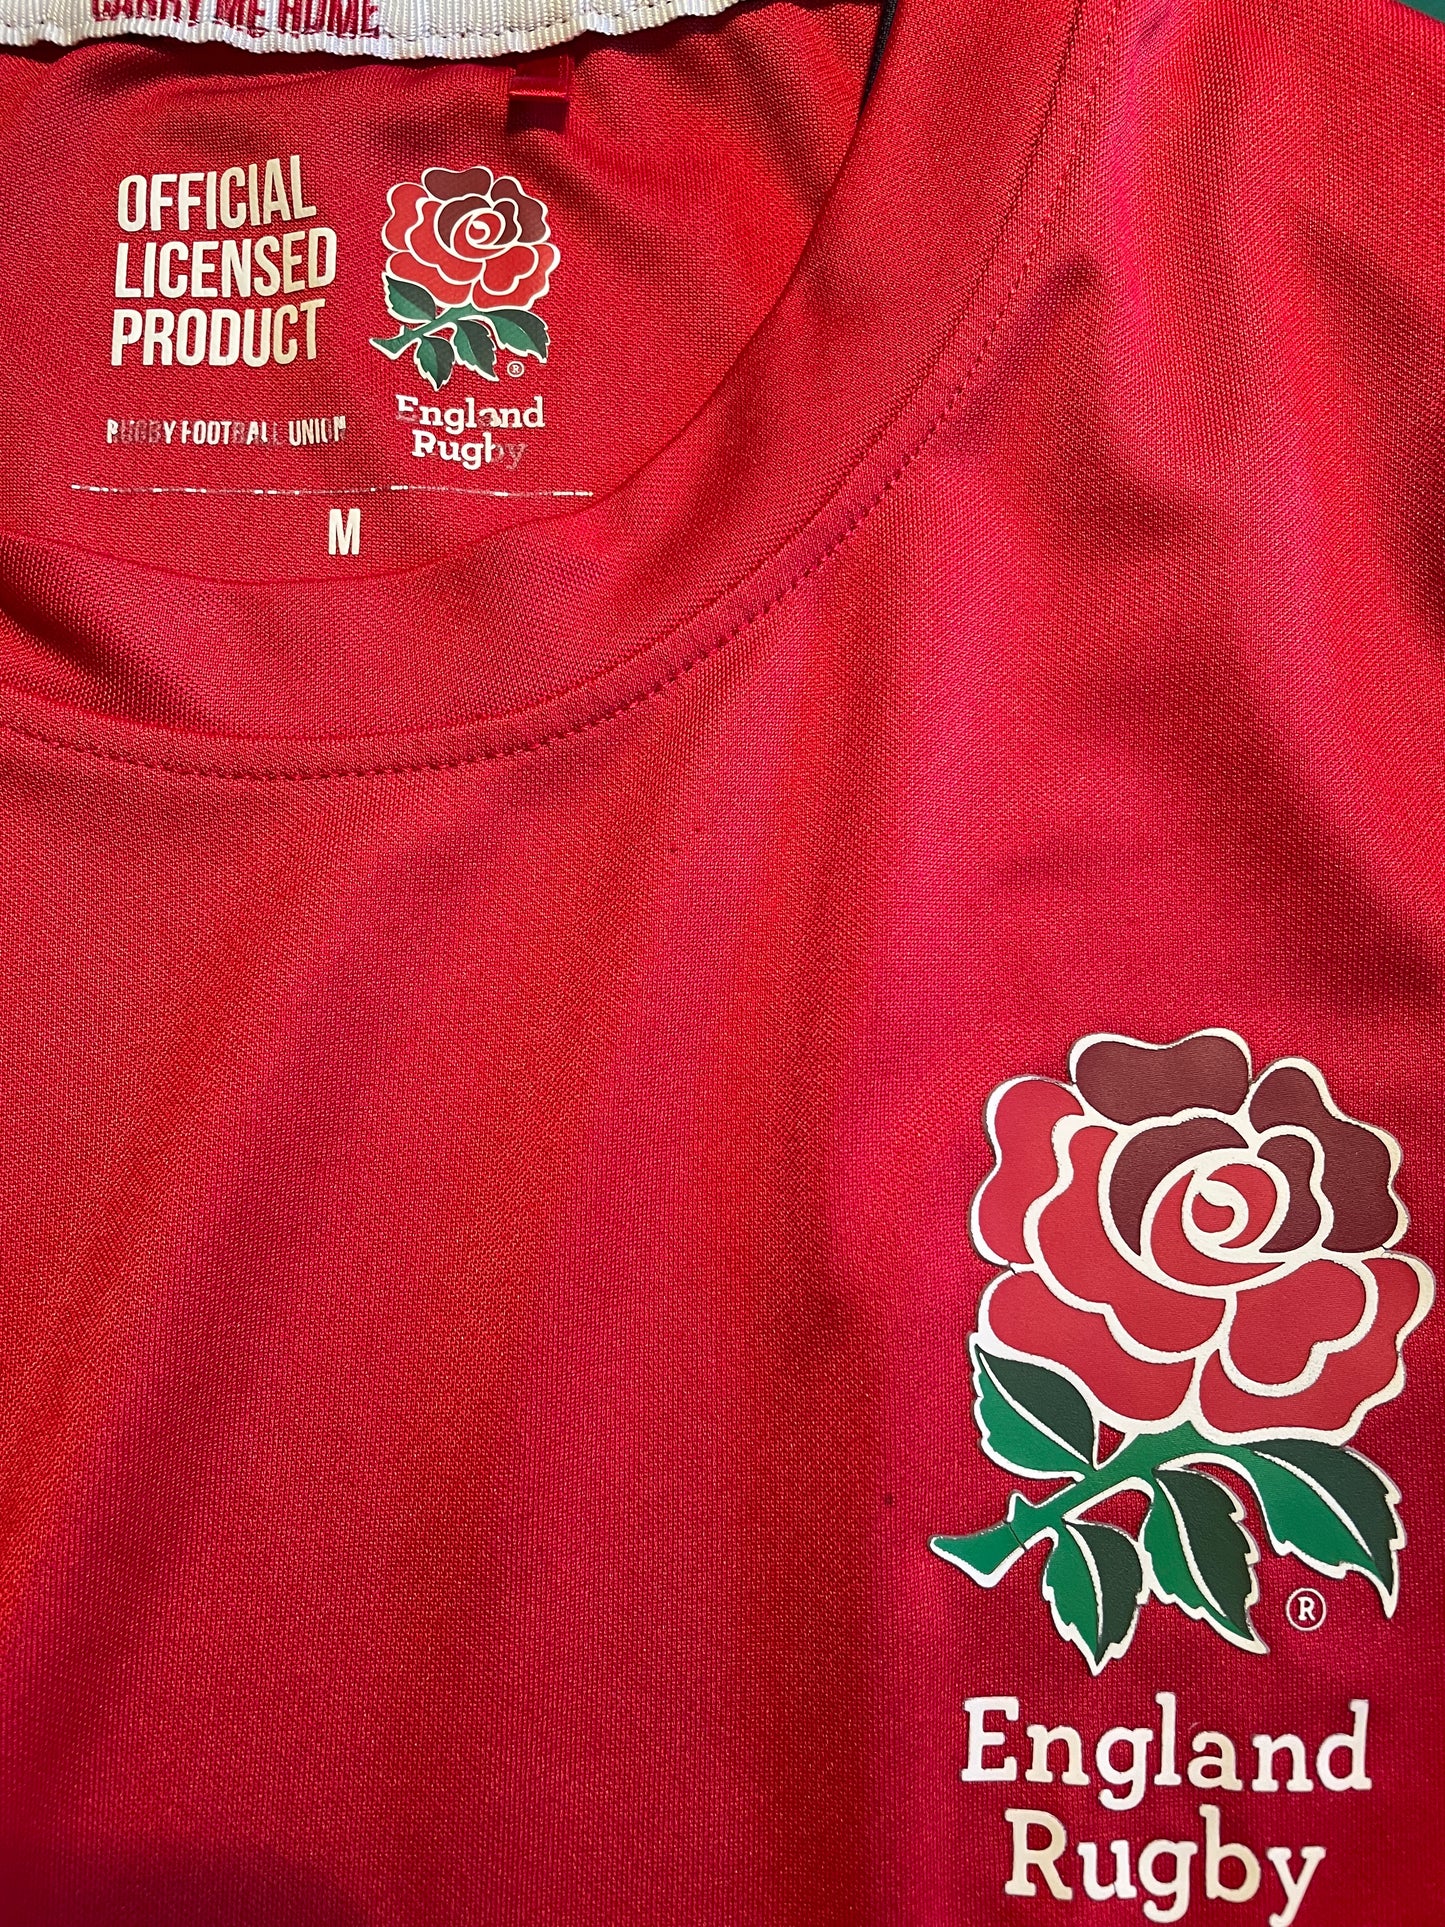 England Rugby Shirt (very good) Adults Medium. Height 23 inches.